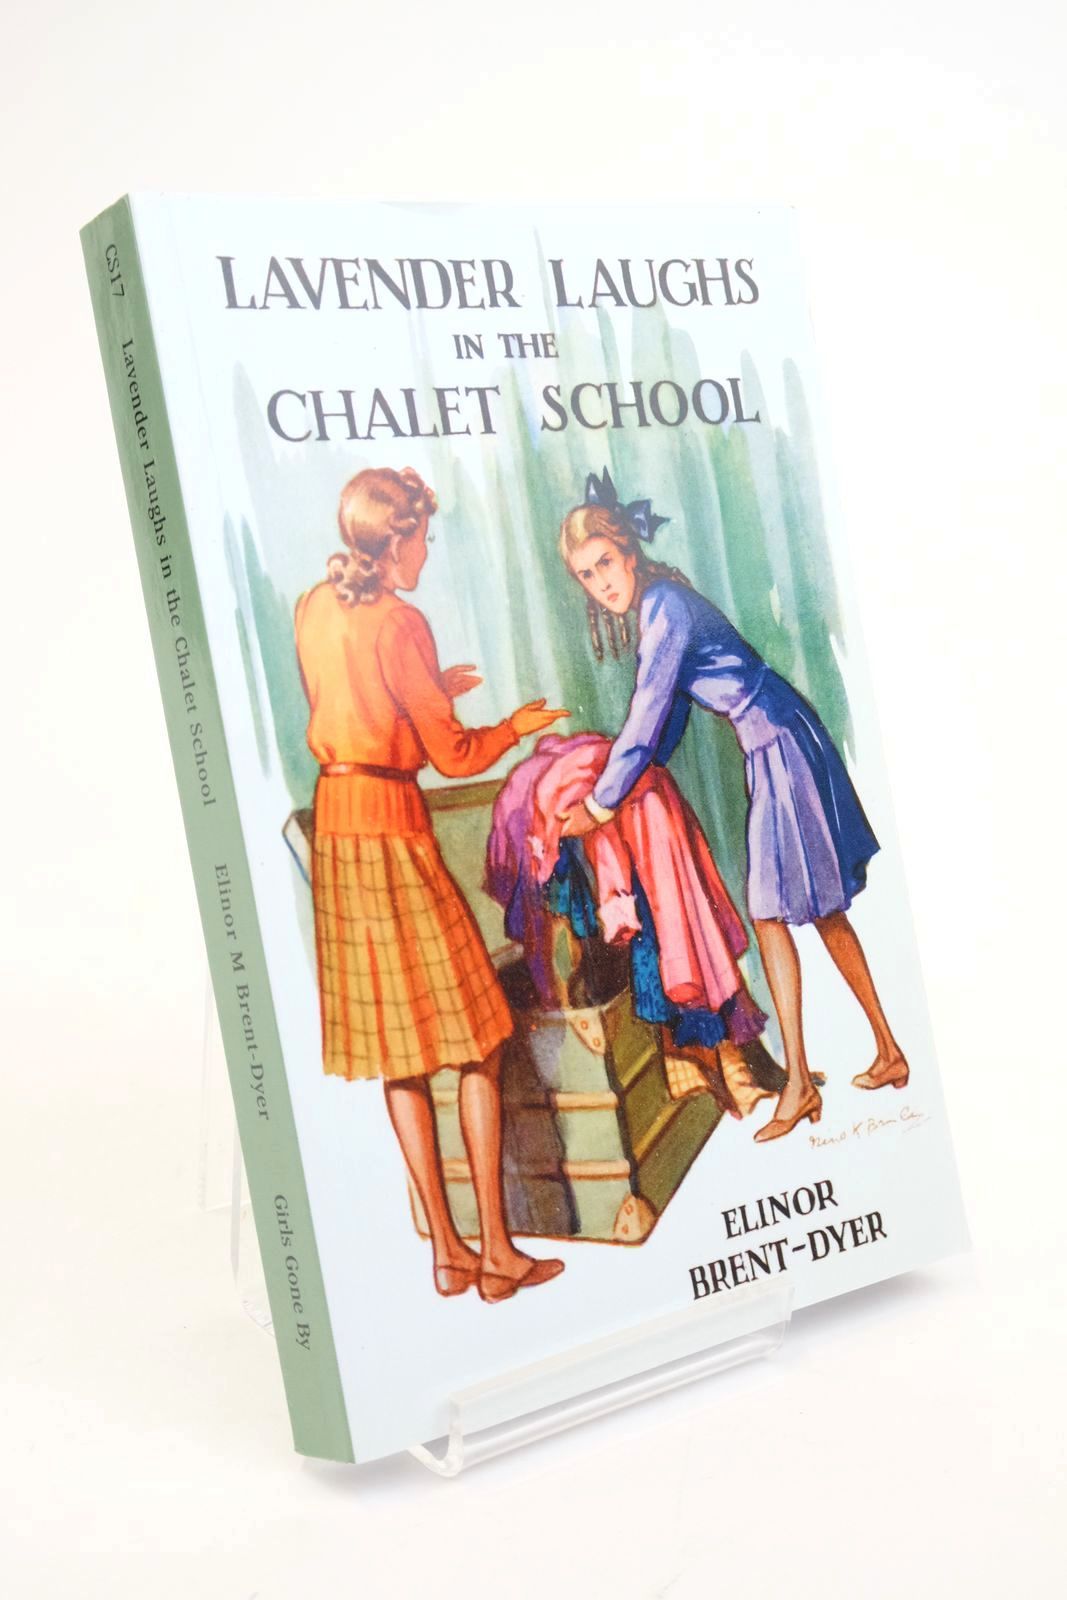 Photo of LAVENDER LAUGHS IN THE CHALET SCHOOL written by Brent-Dyer, Elinor M. published by Girls Gone By (STOCK CODE: 1322369)  for sale by Stella & Rose's Books